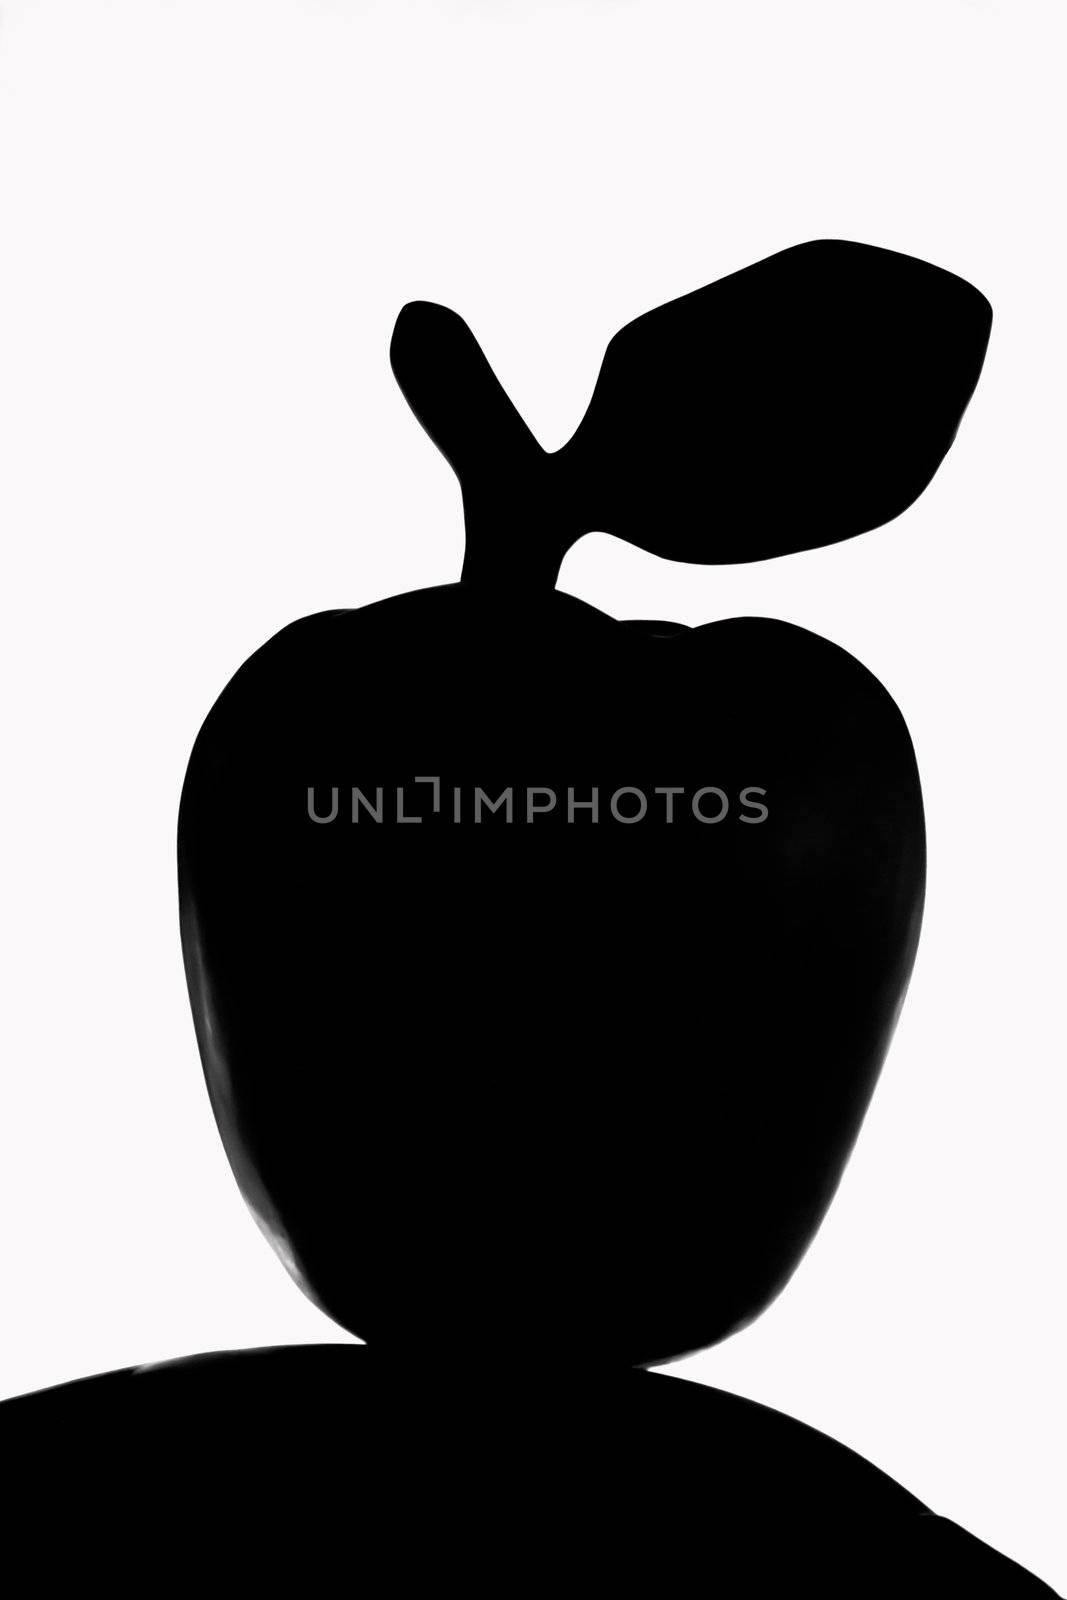 Black apple silhouette isolated on the white background